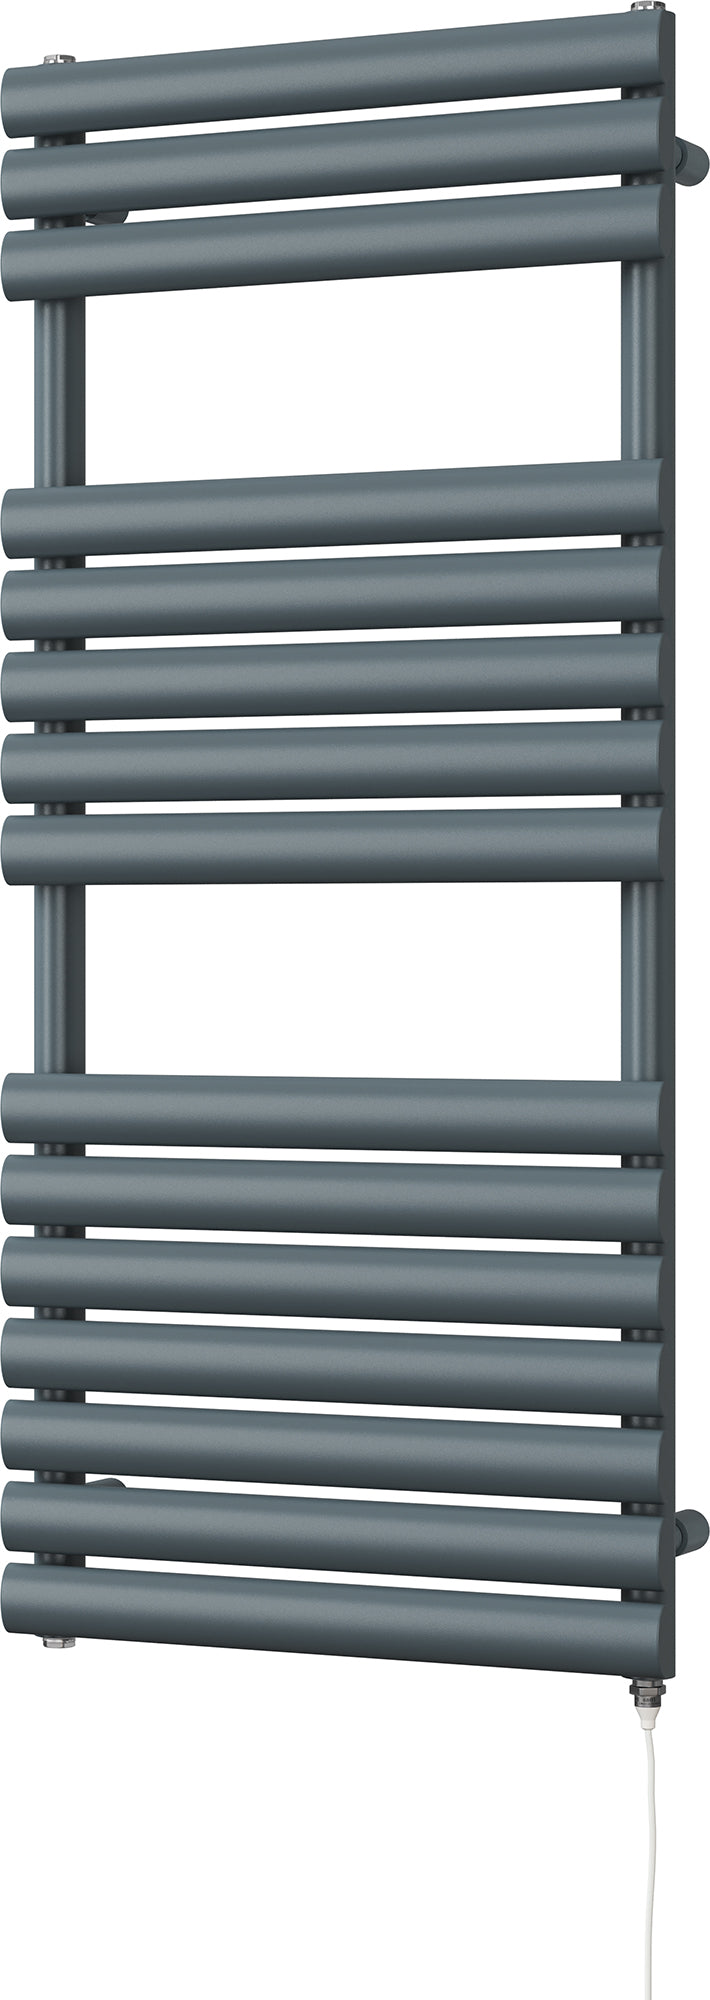 Omeara - Anthracite Electric Towel Rail H1120mm x W500mm 400w Standard